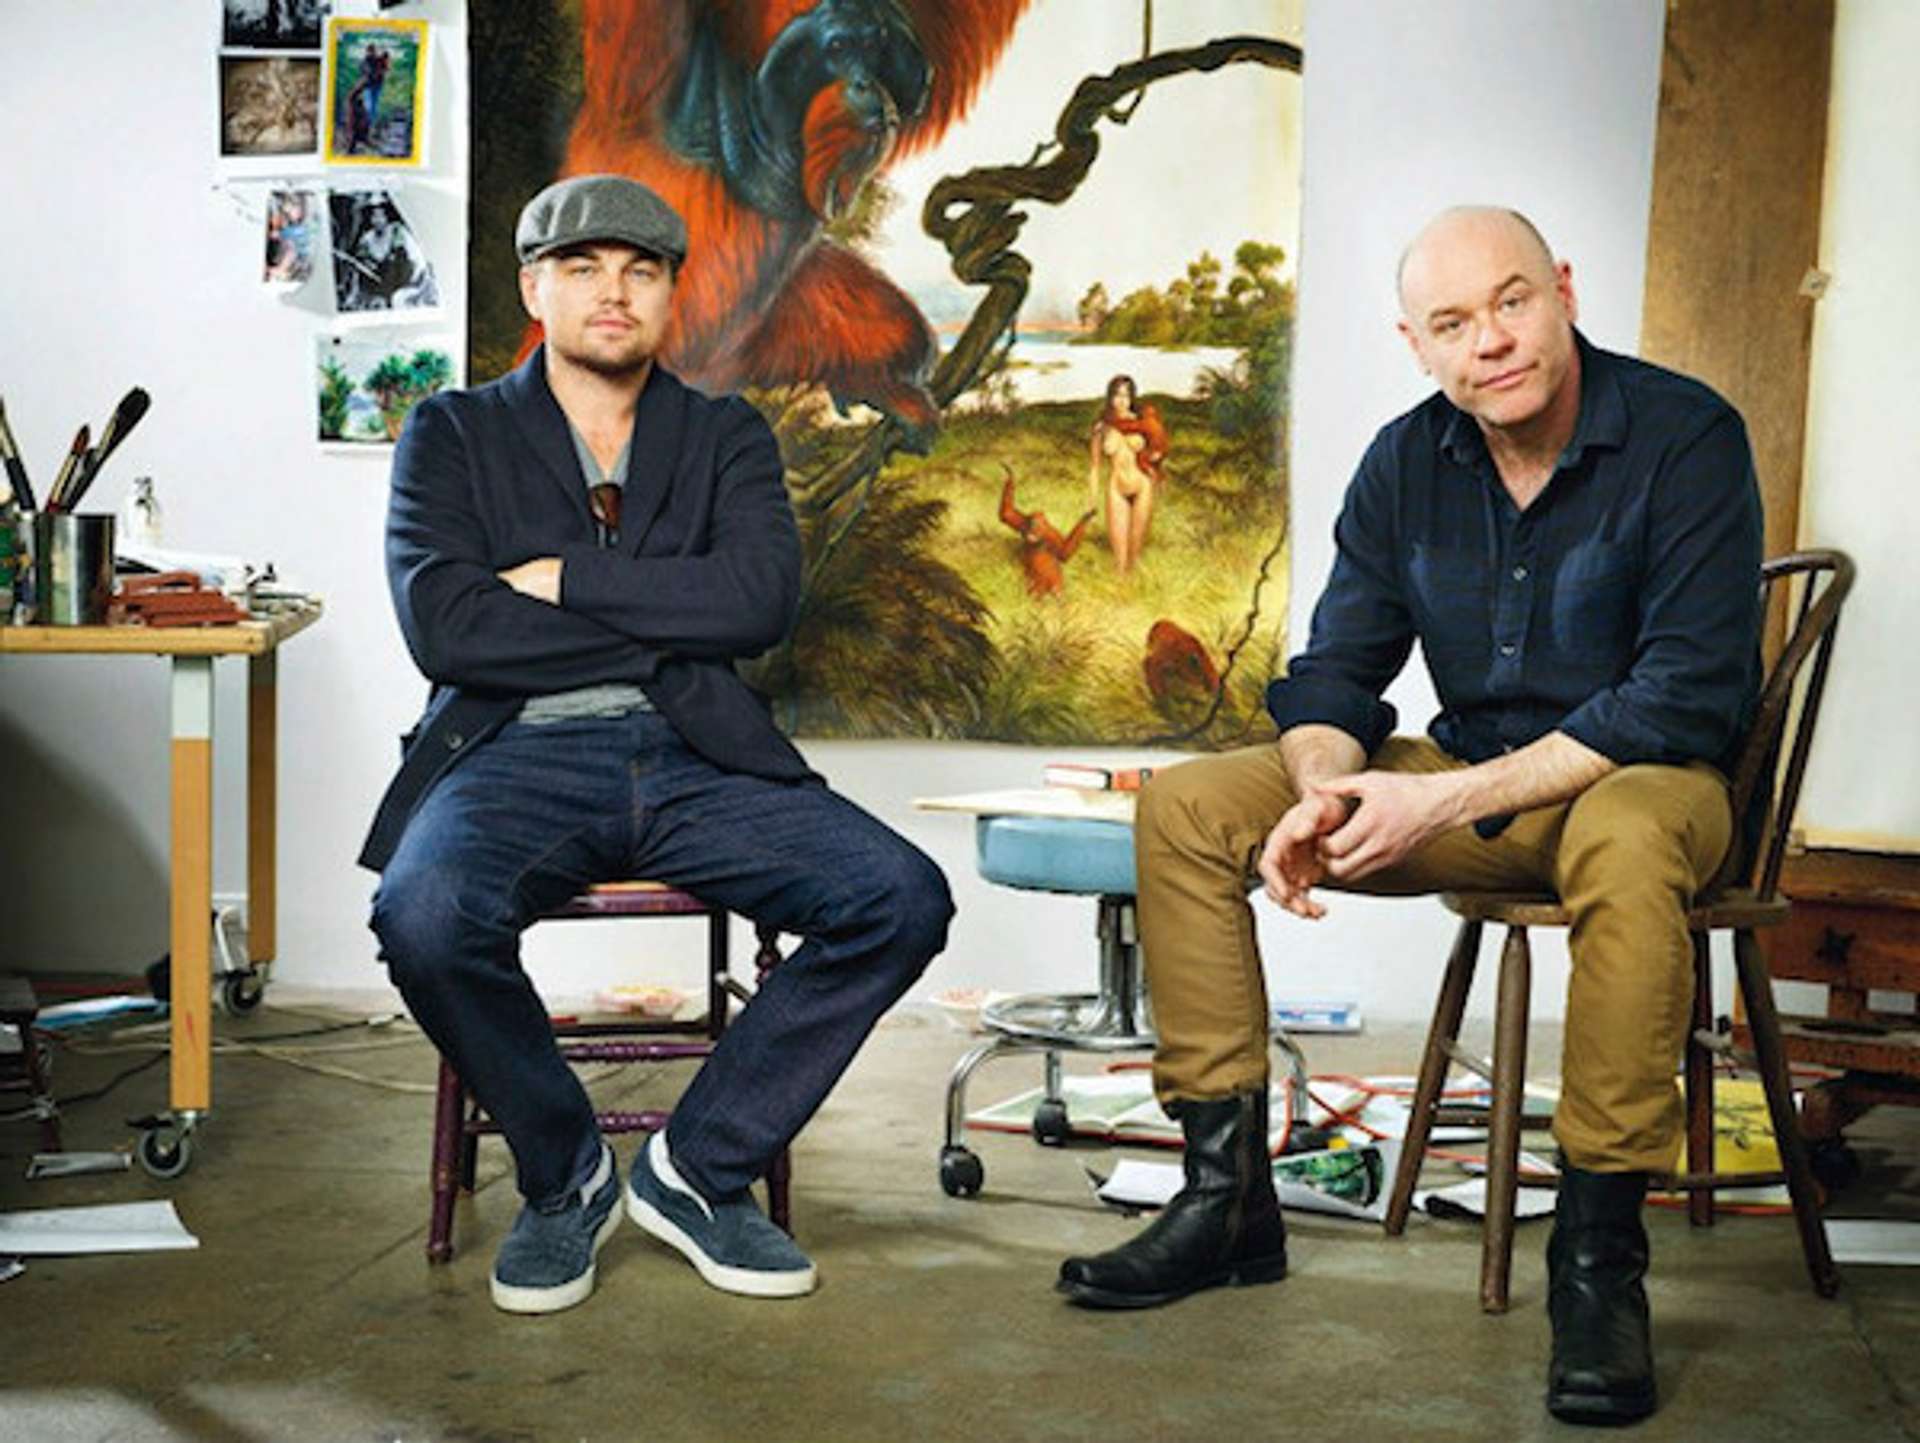 Actor Leonardo DiCaprio and artist Walton Ford sitting in the artist's studio, with a painting behind them.